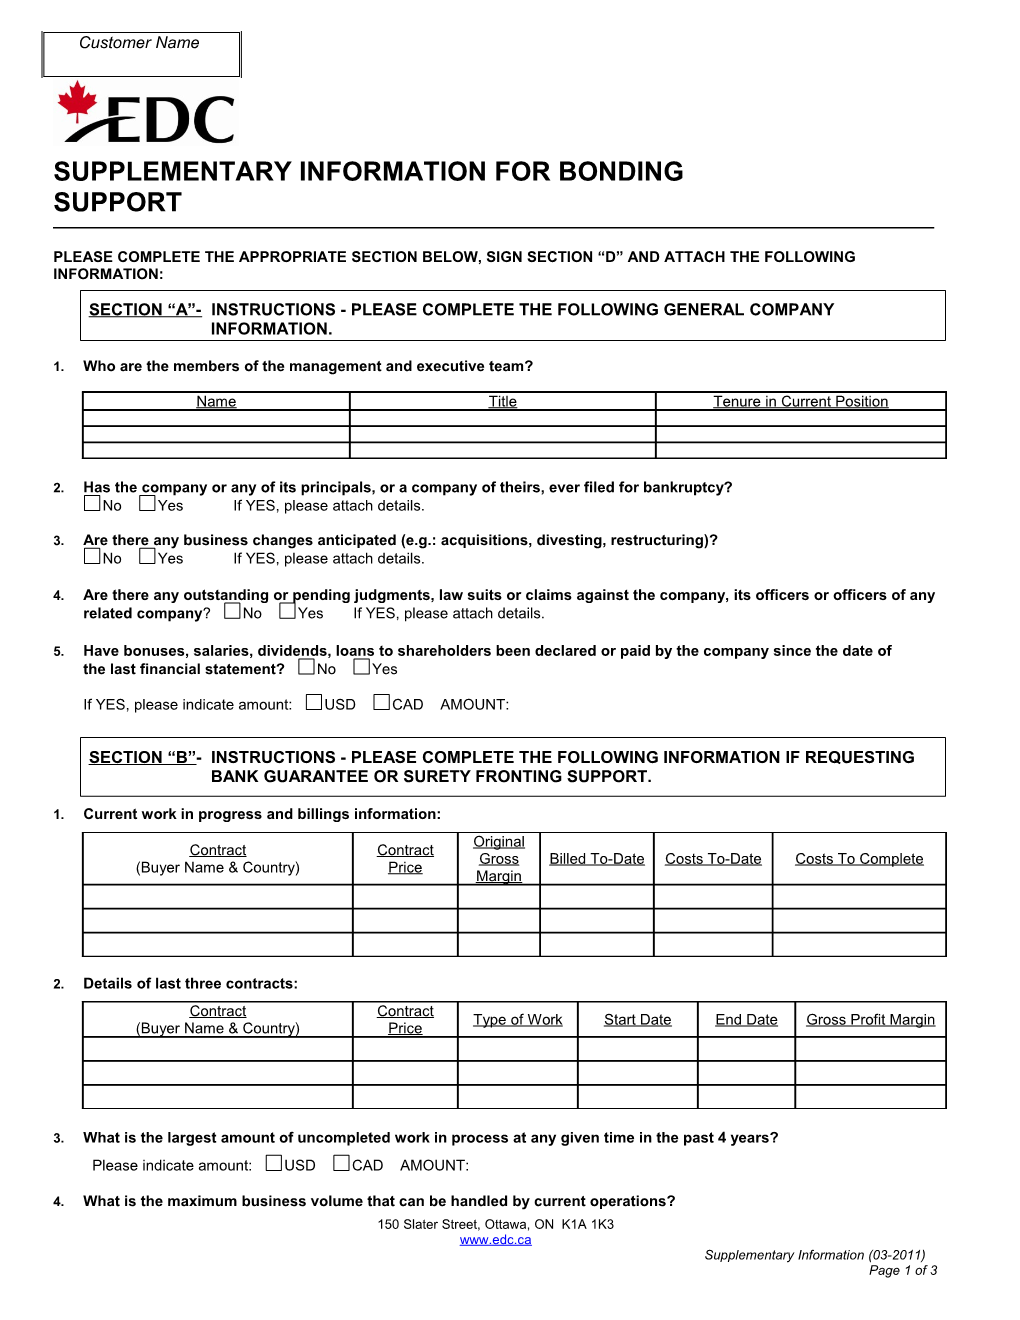 Supplementary Information for Bonding Support (Word Version)